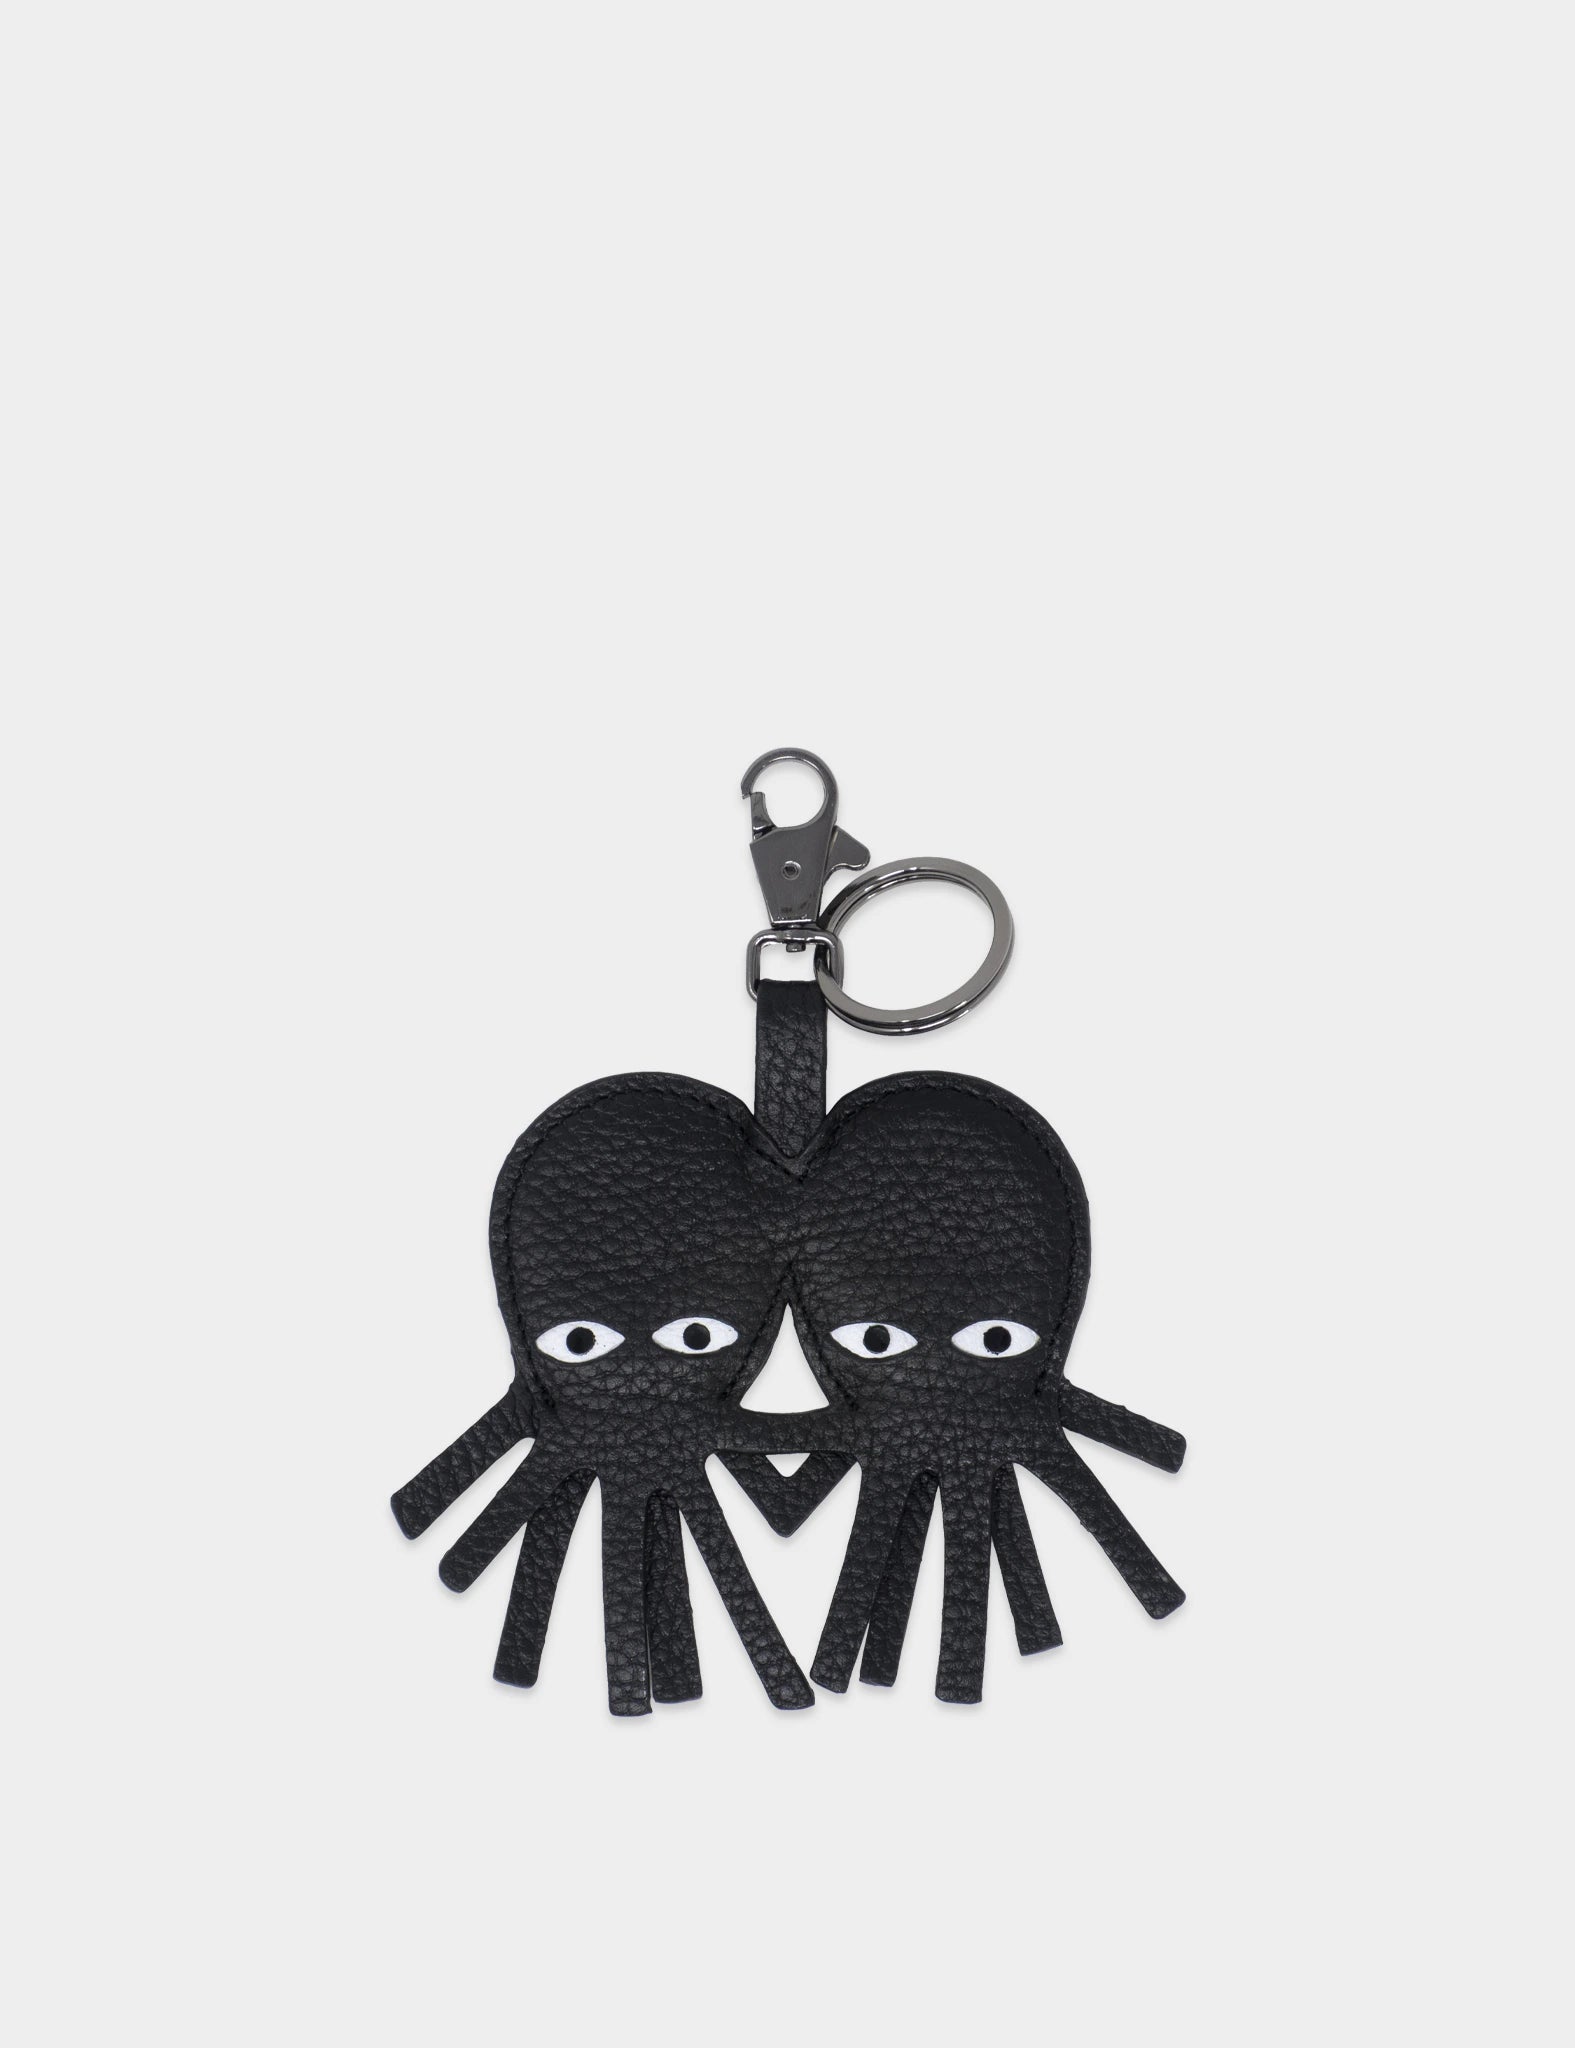 Octotwins Charm - Black Leather Keychain -  Front view